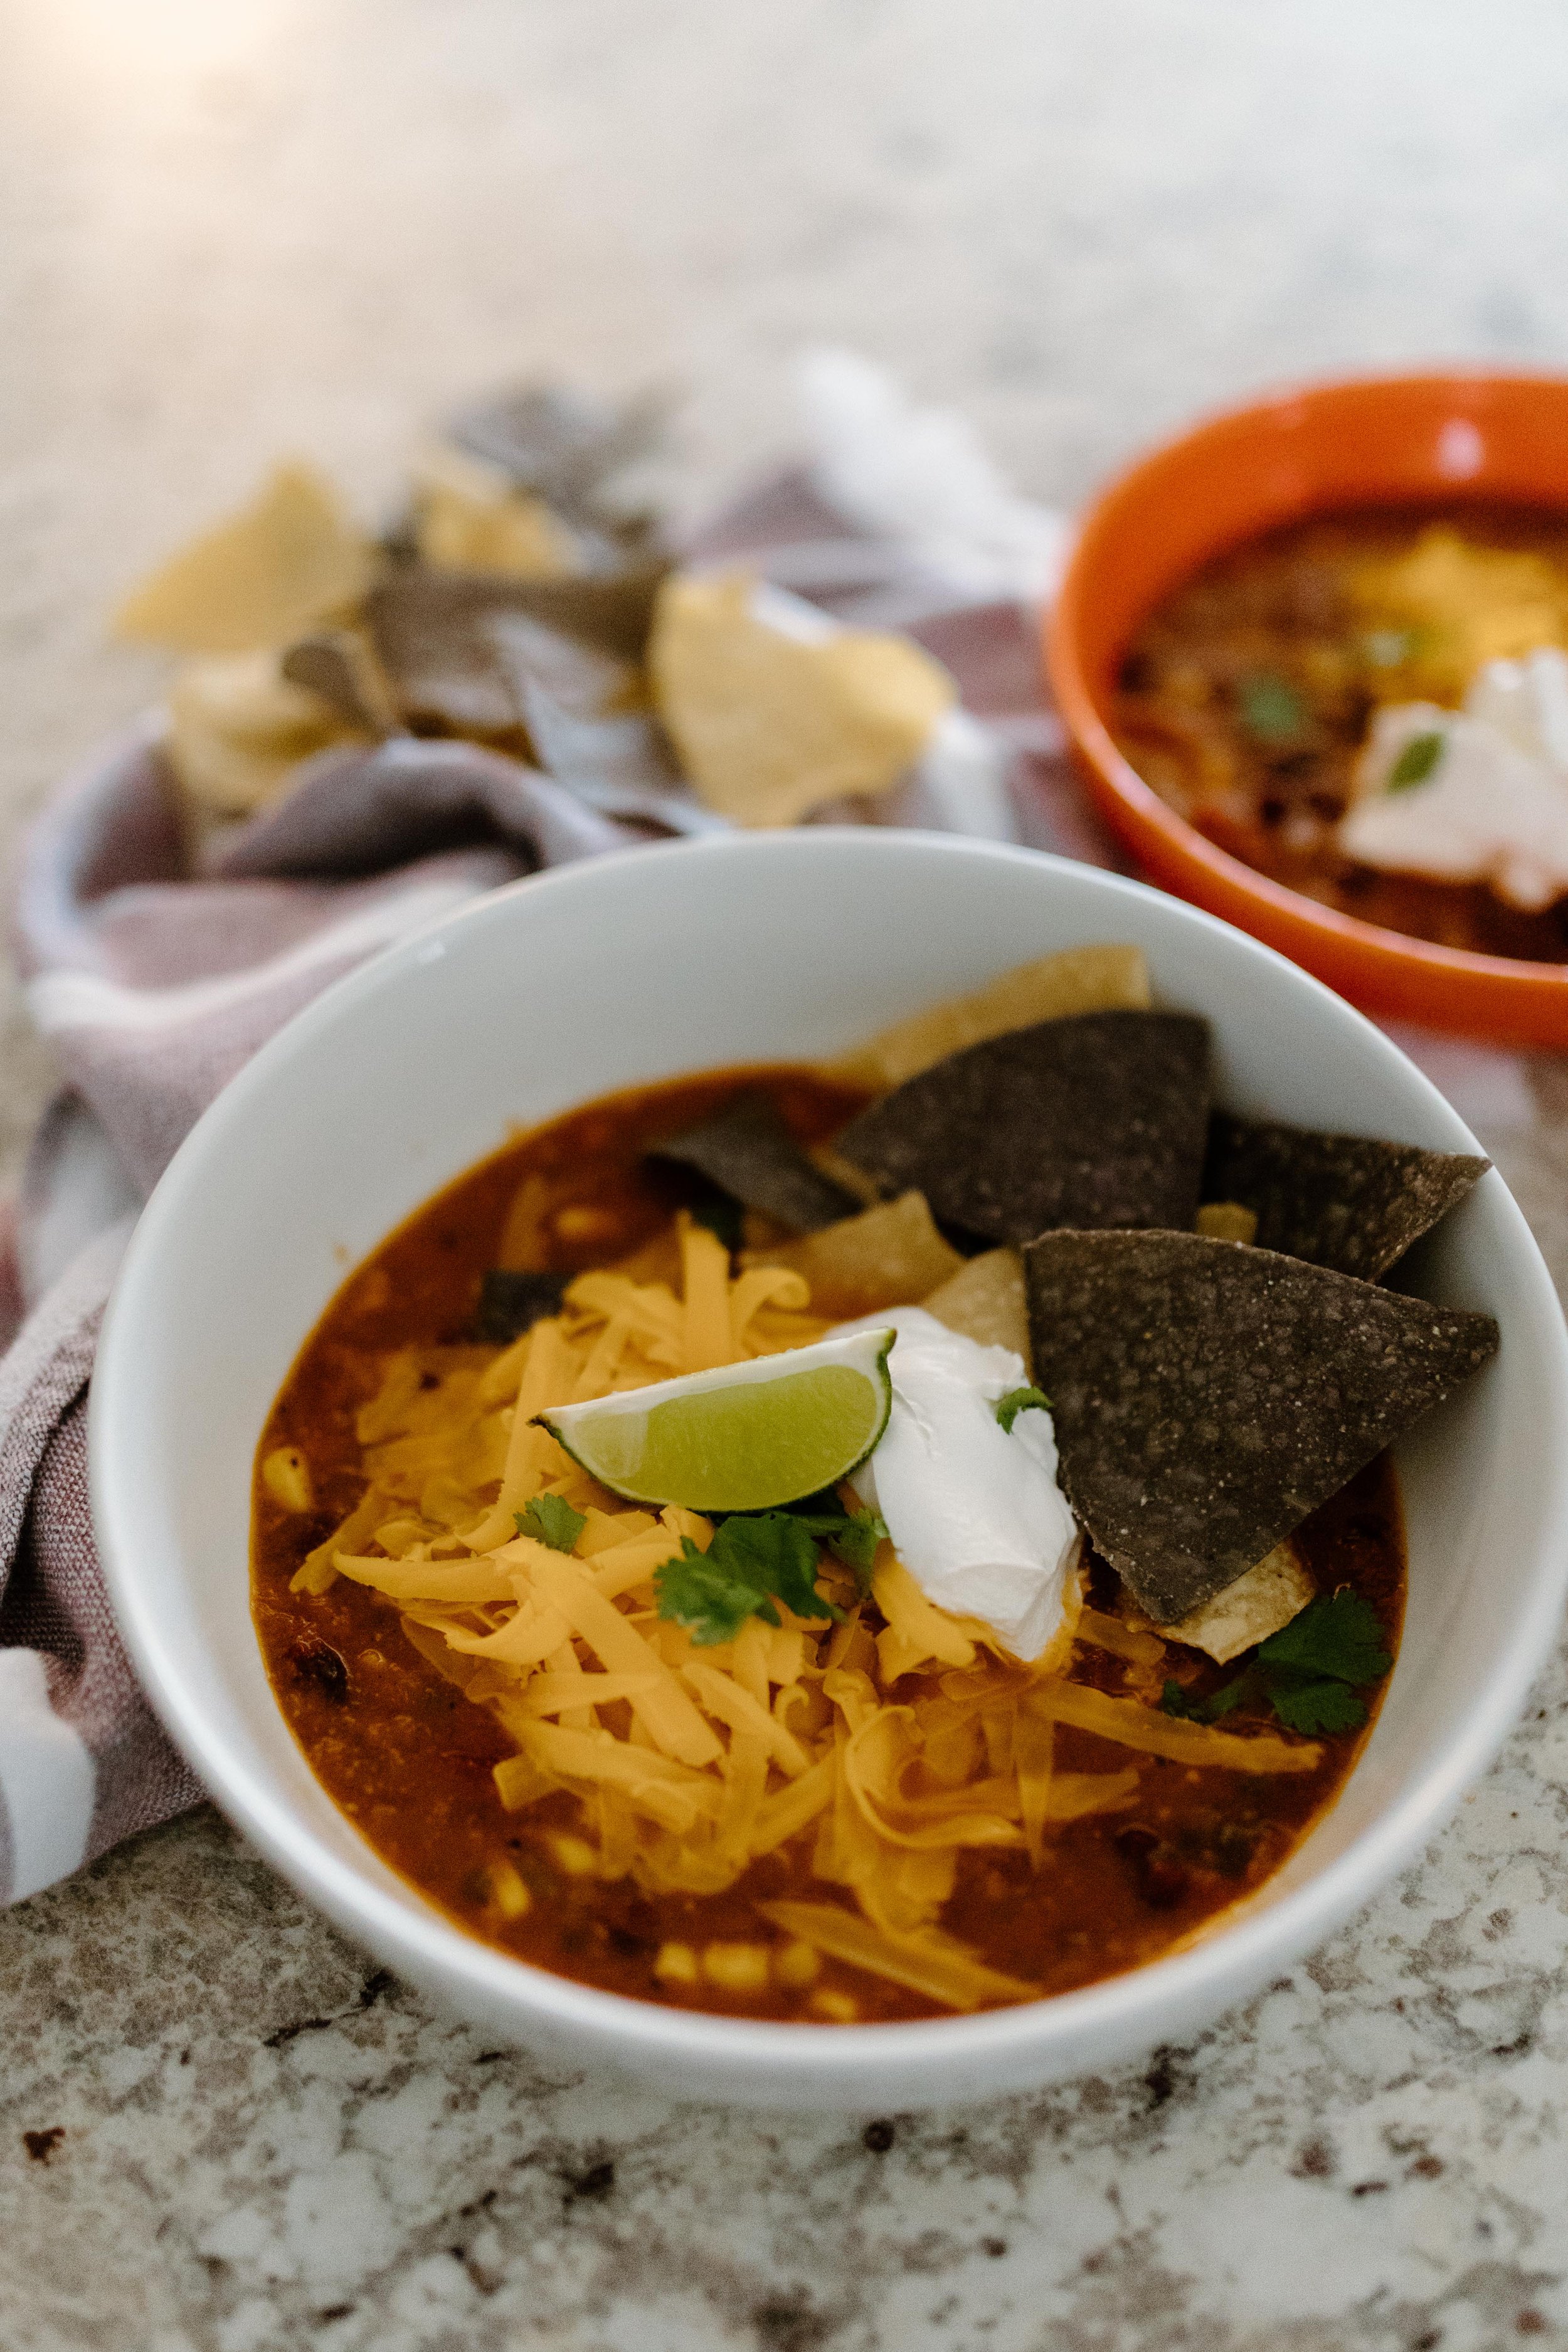 Easy Mexican chicken enchilada soup that you can make in the Instant Pot